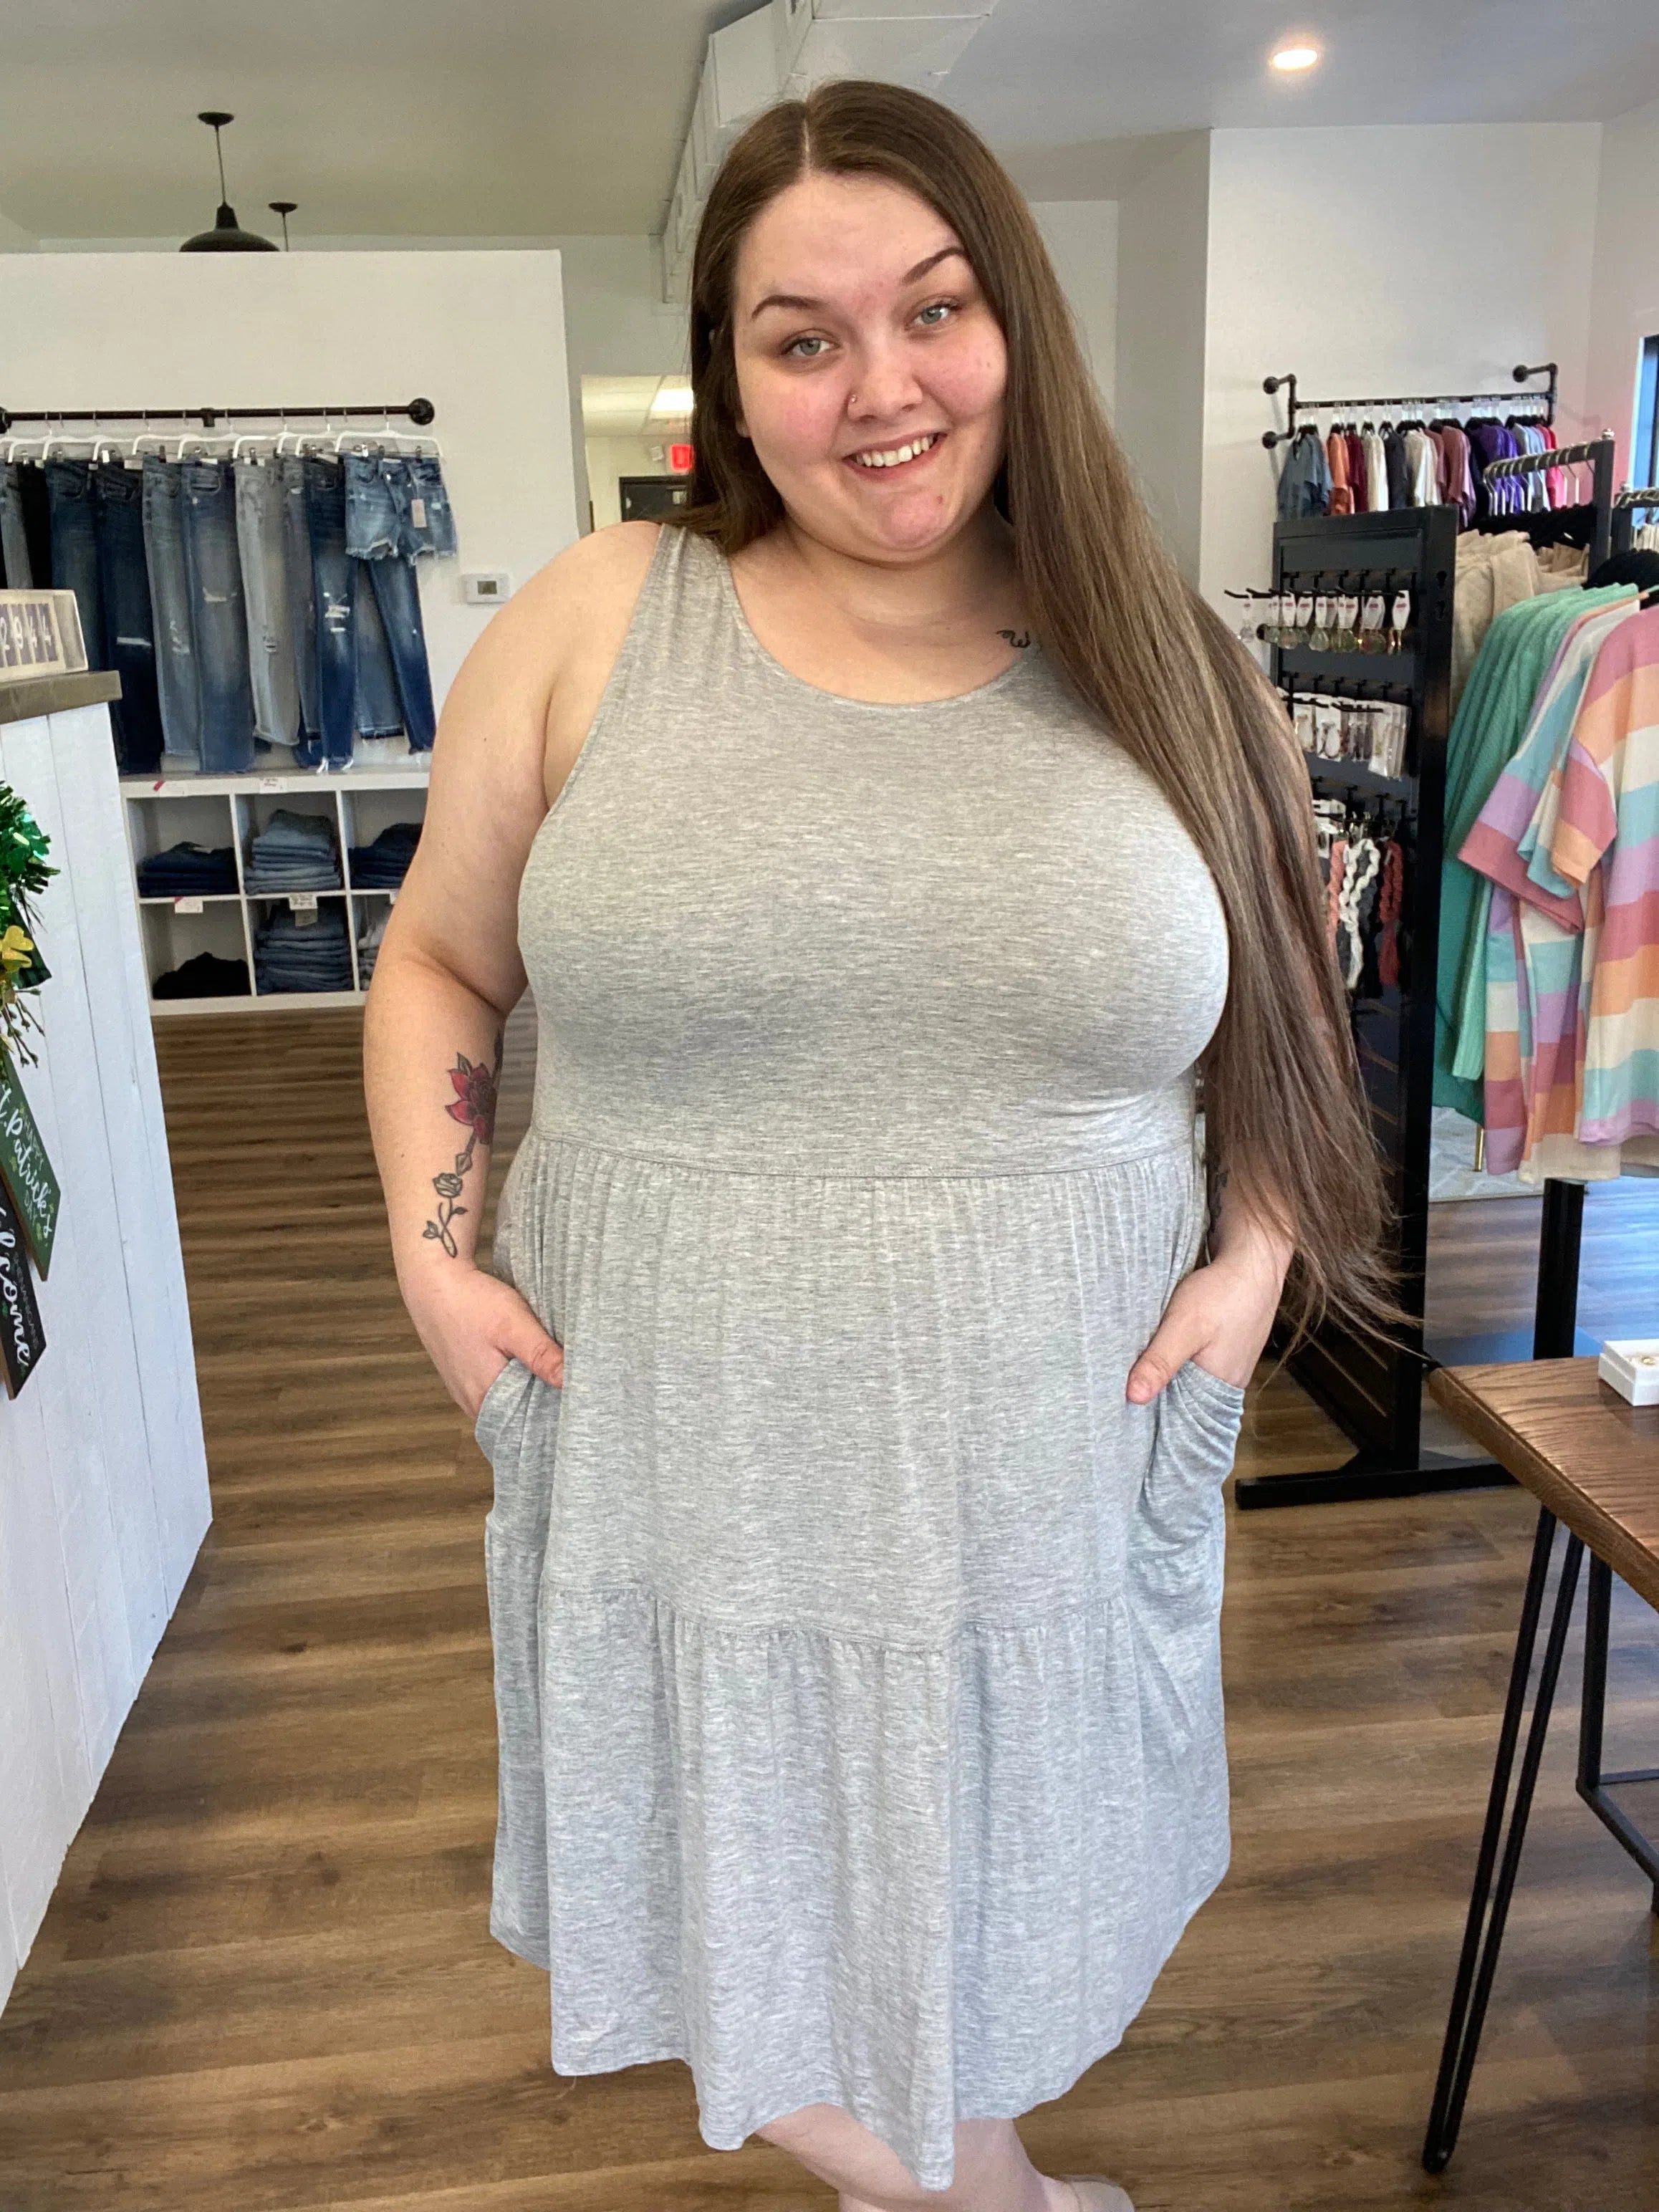 Shop Classic Gray Day Dress with Pockets-Dresses at Ruby Joy Boutique, a Women's Clothing Store in Pickerington, Ohio